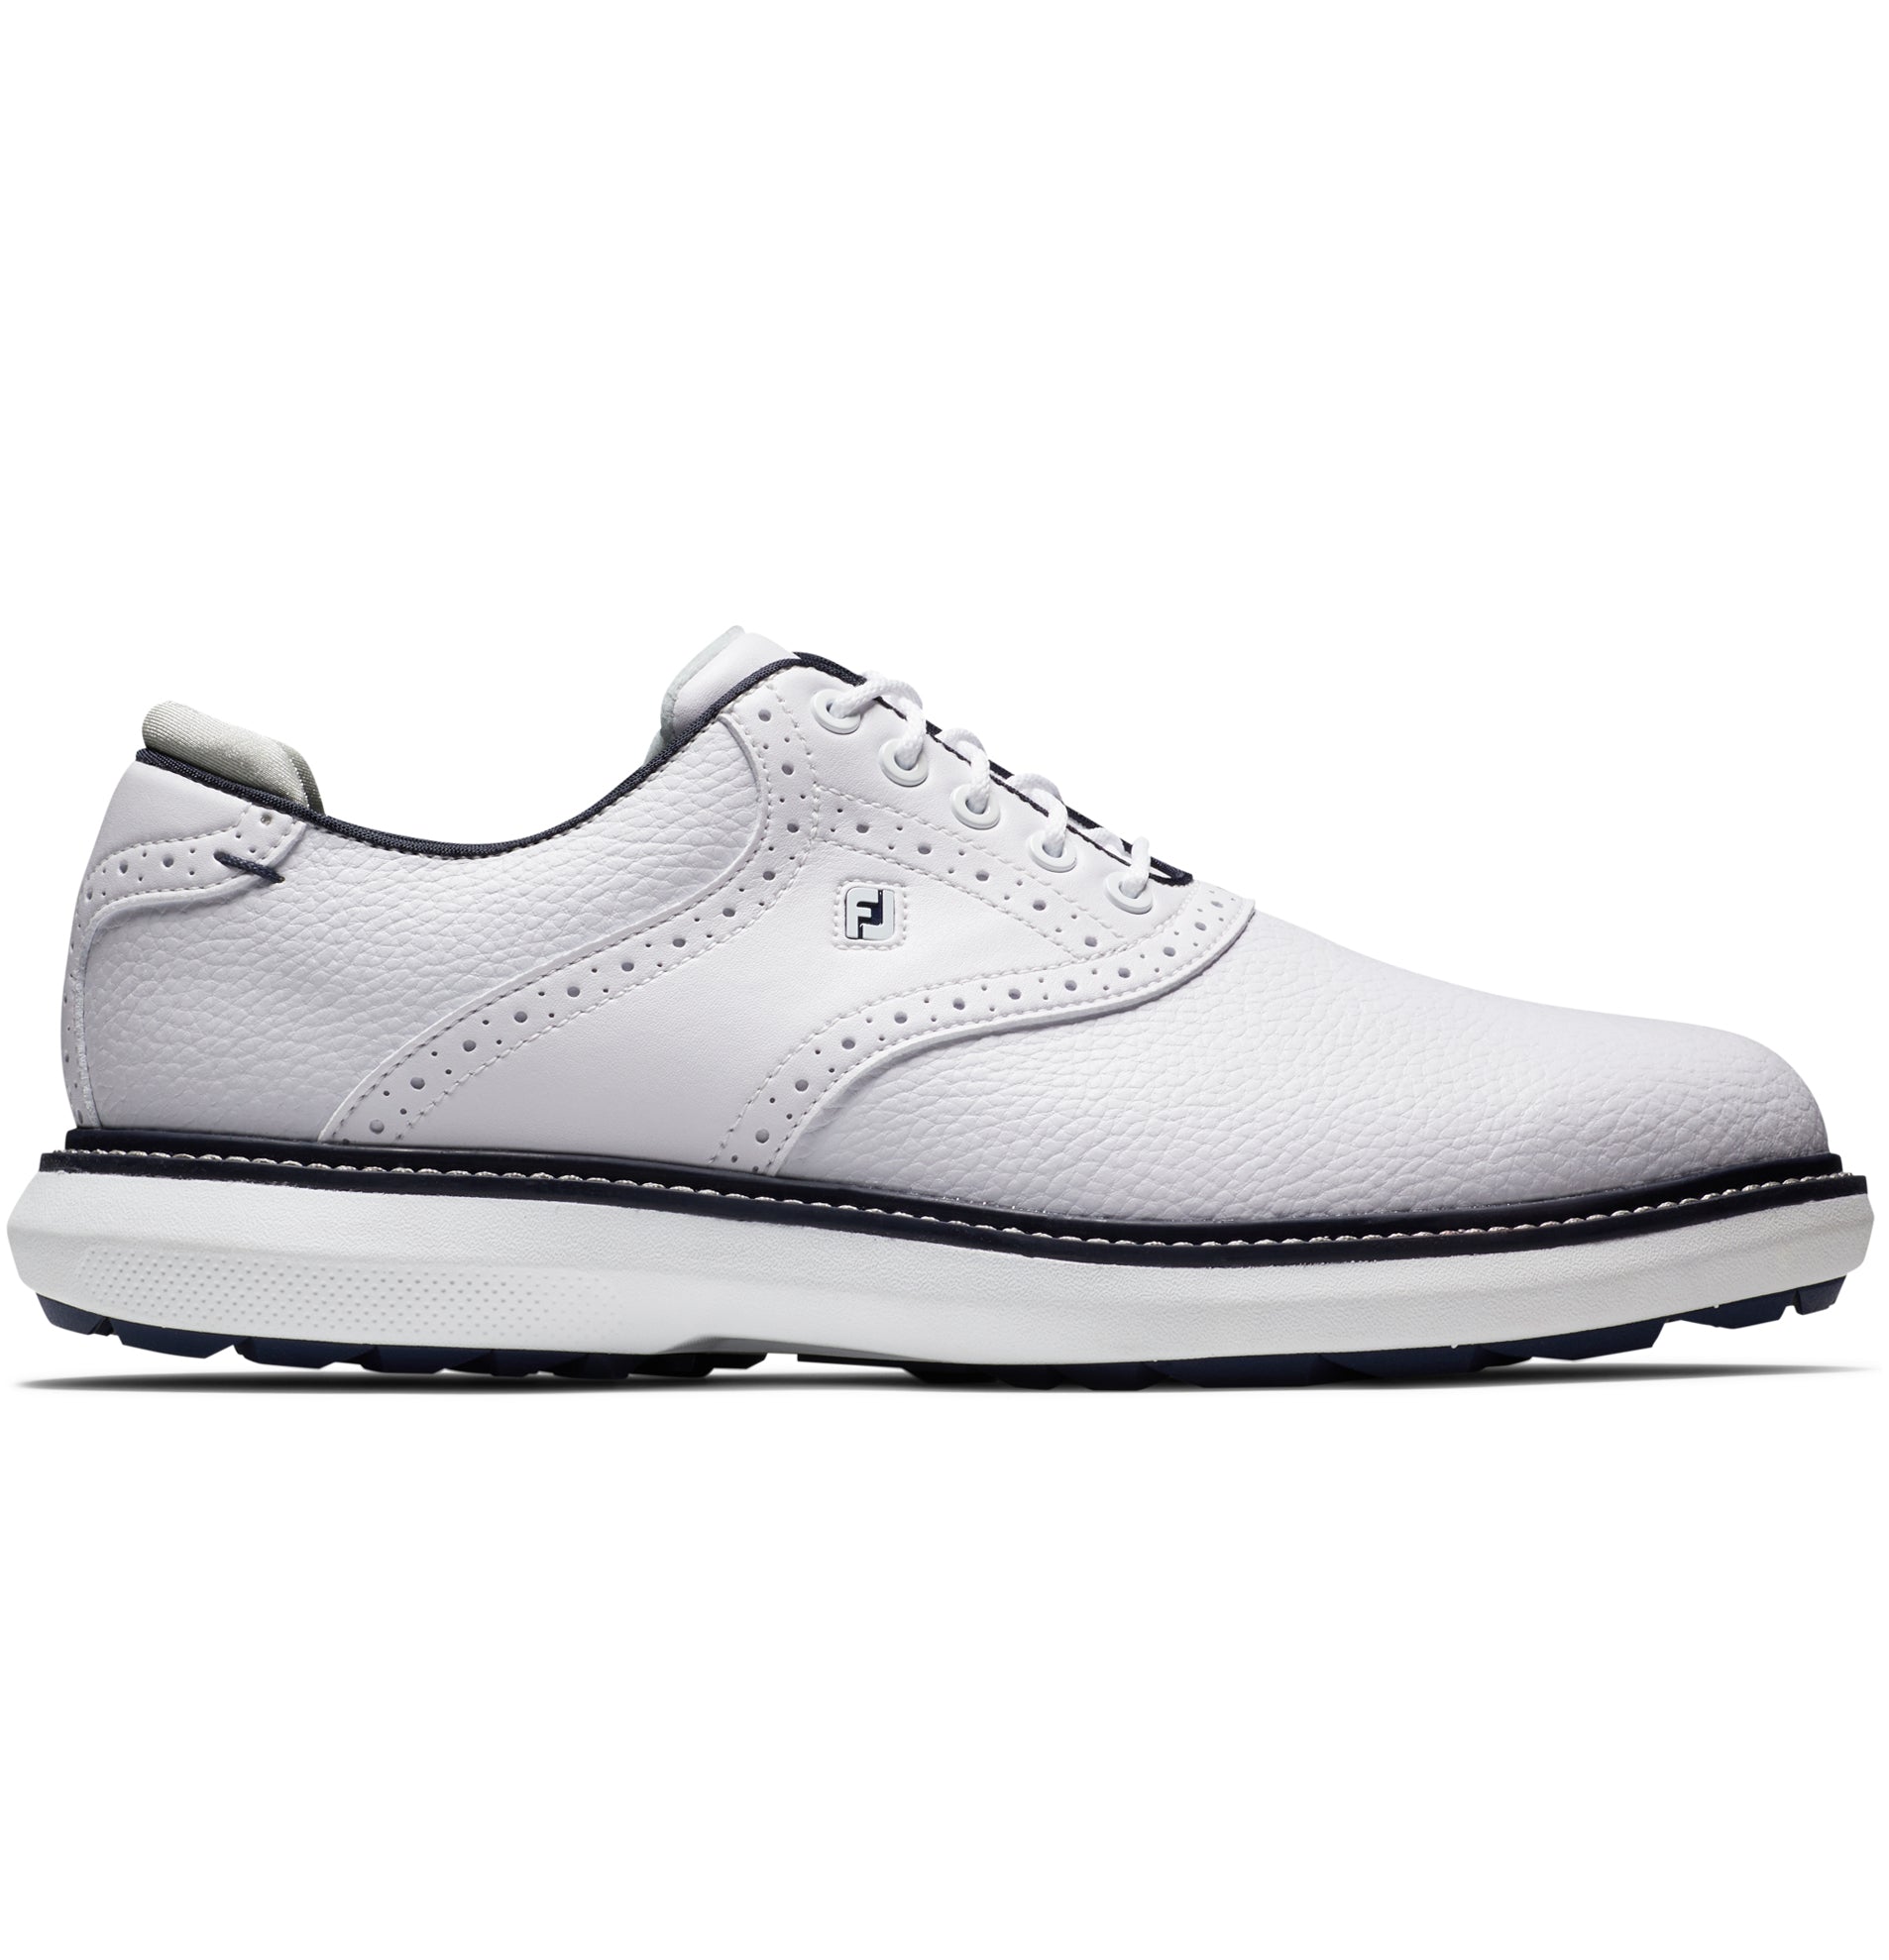 FootJoy Men´s Traditions Spikeless Golf Shoe， White/White/Navy